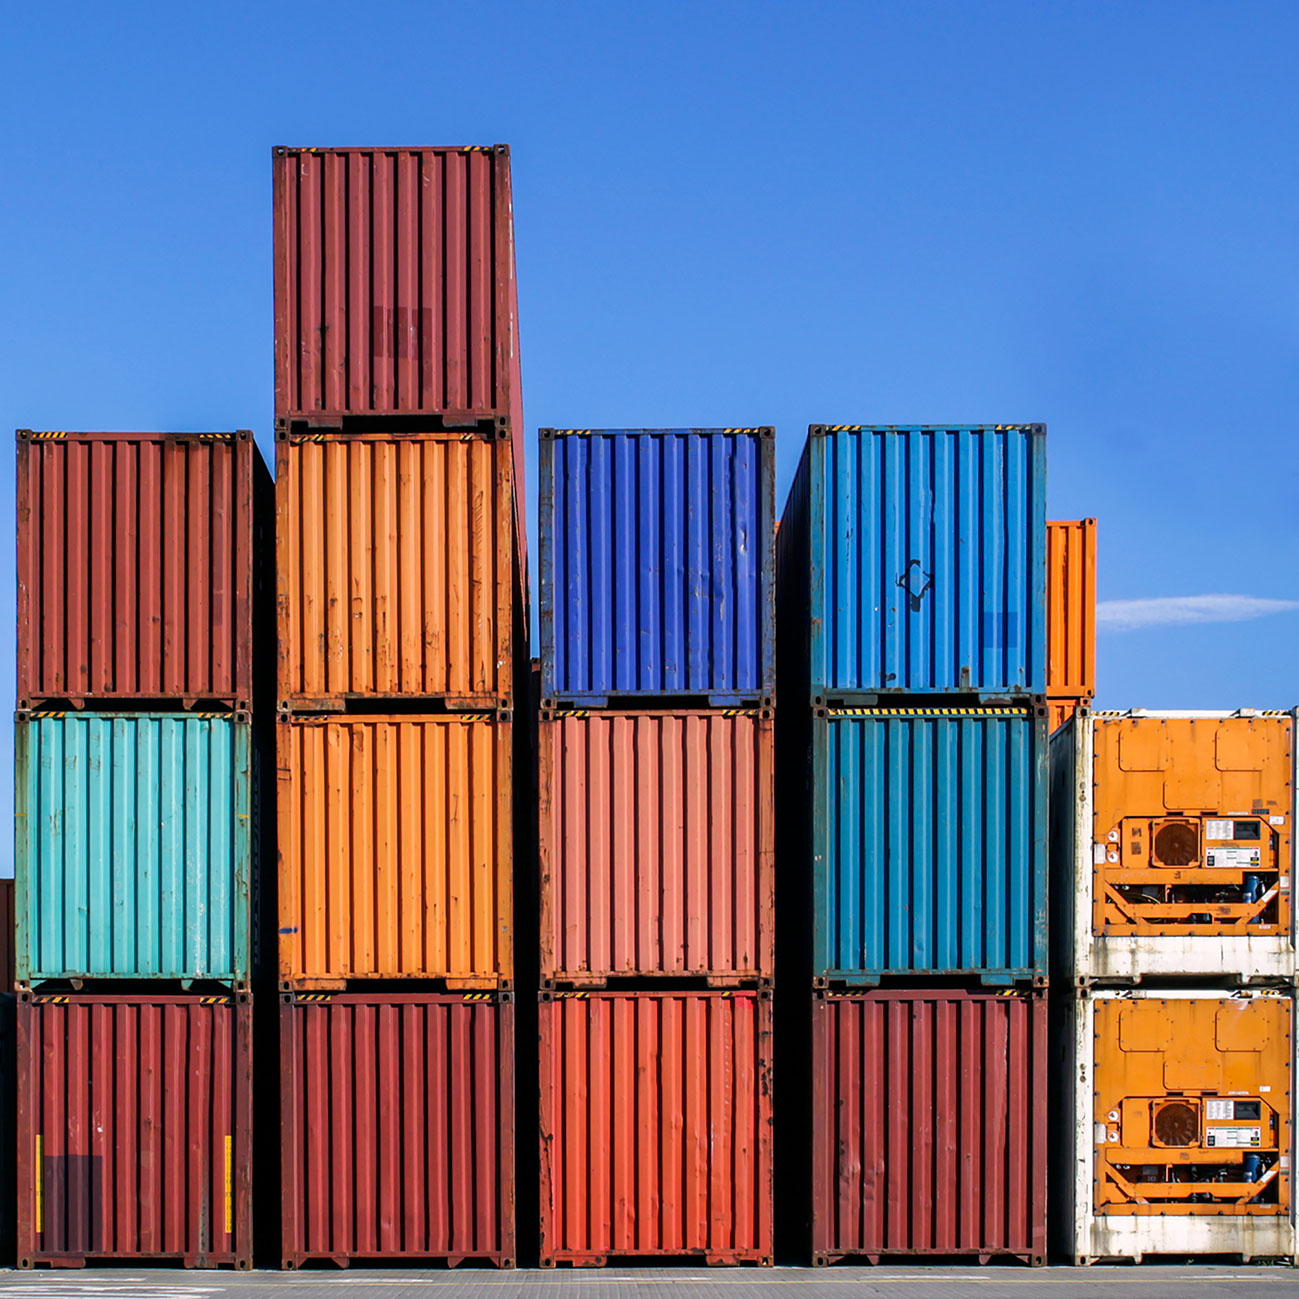 How Shipping Containers Work?